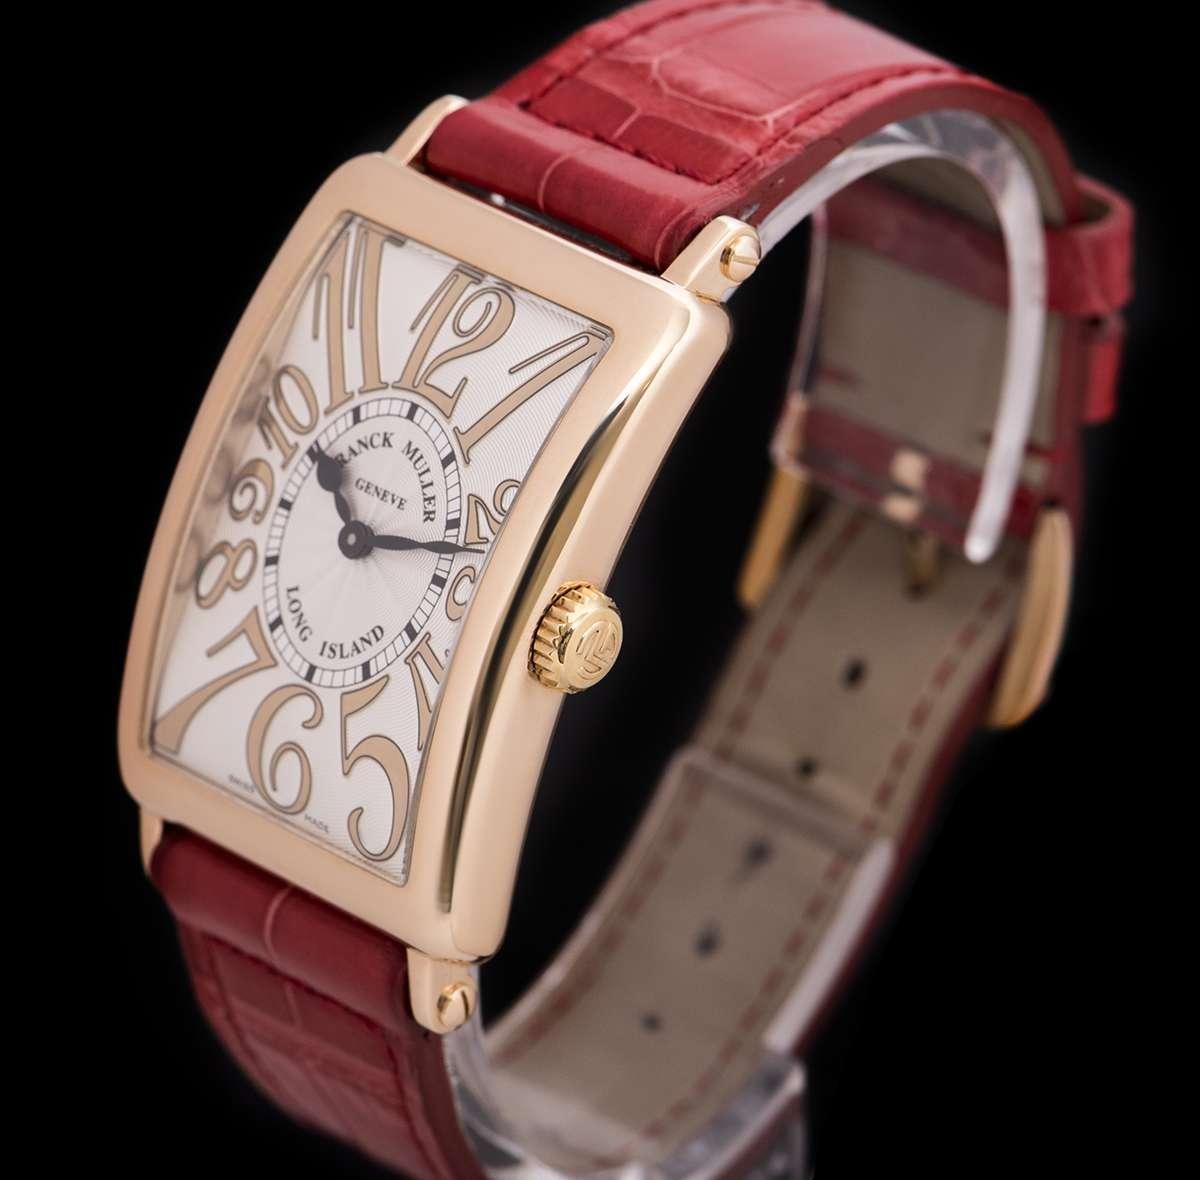 An 18k Rose Gold Long Island Classic Ladies Wristwatch, silver guilloche dial with applied arabic numbers, a fixed 18k rose gold bezel, an original red leather strap with an original 18k rose gold pin buckle, sapphire glass, quartz movement, in